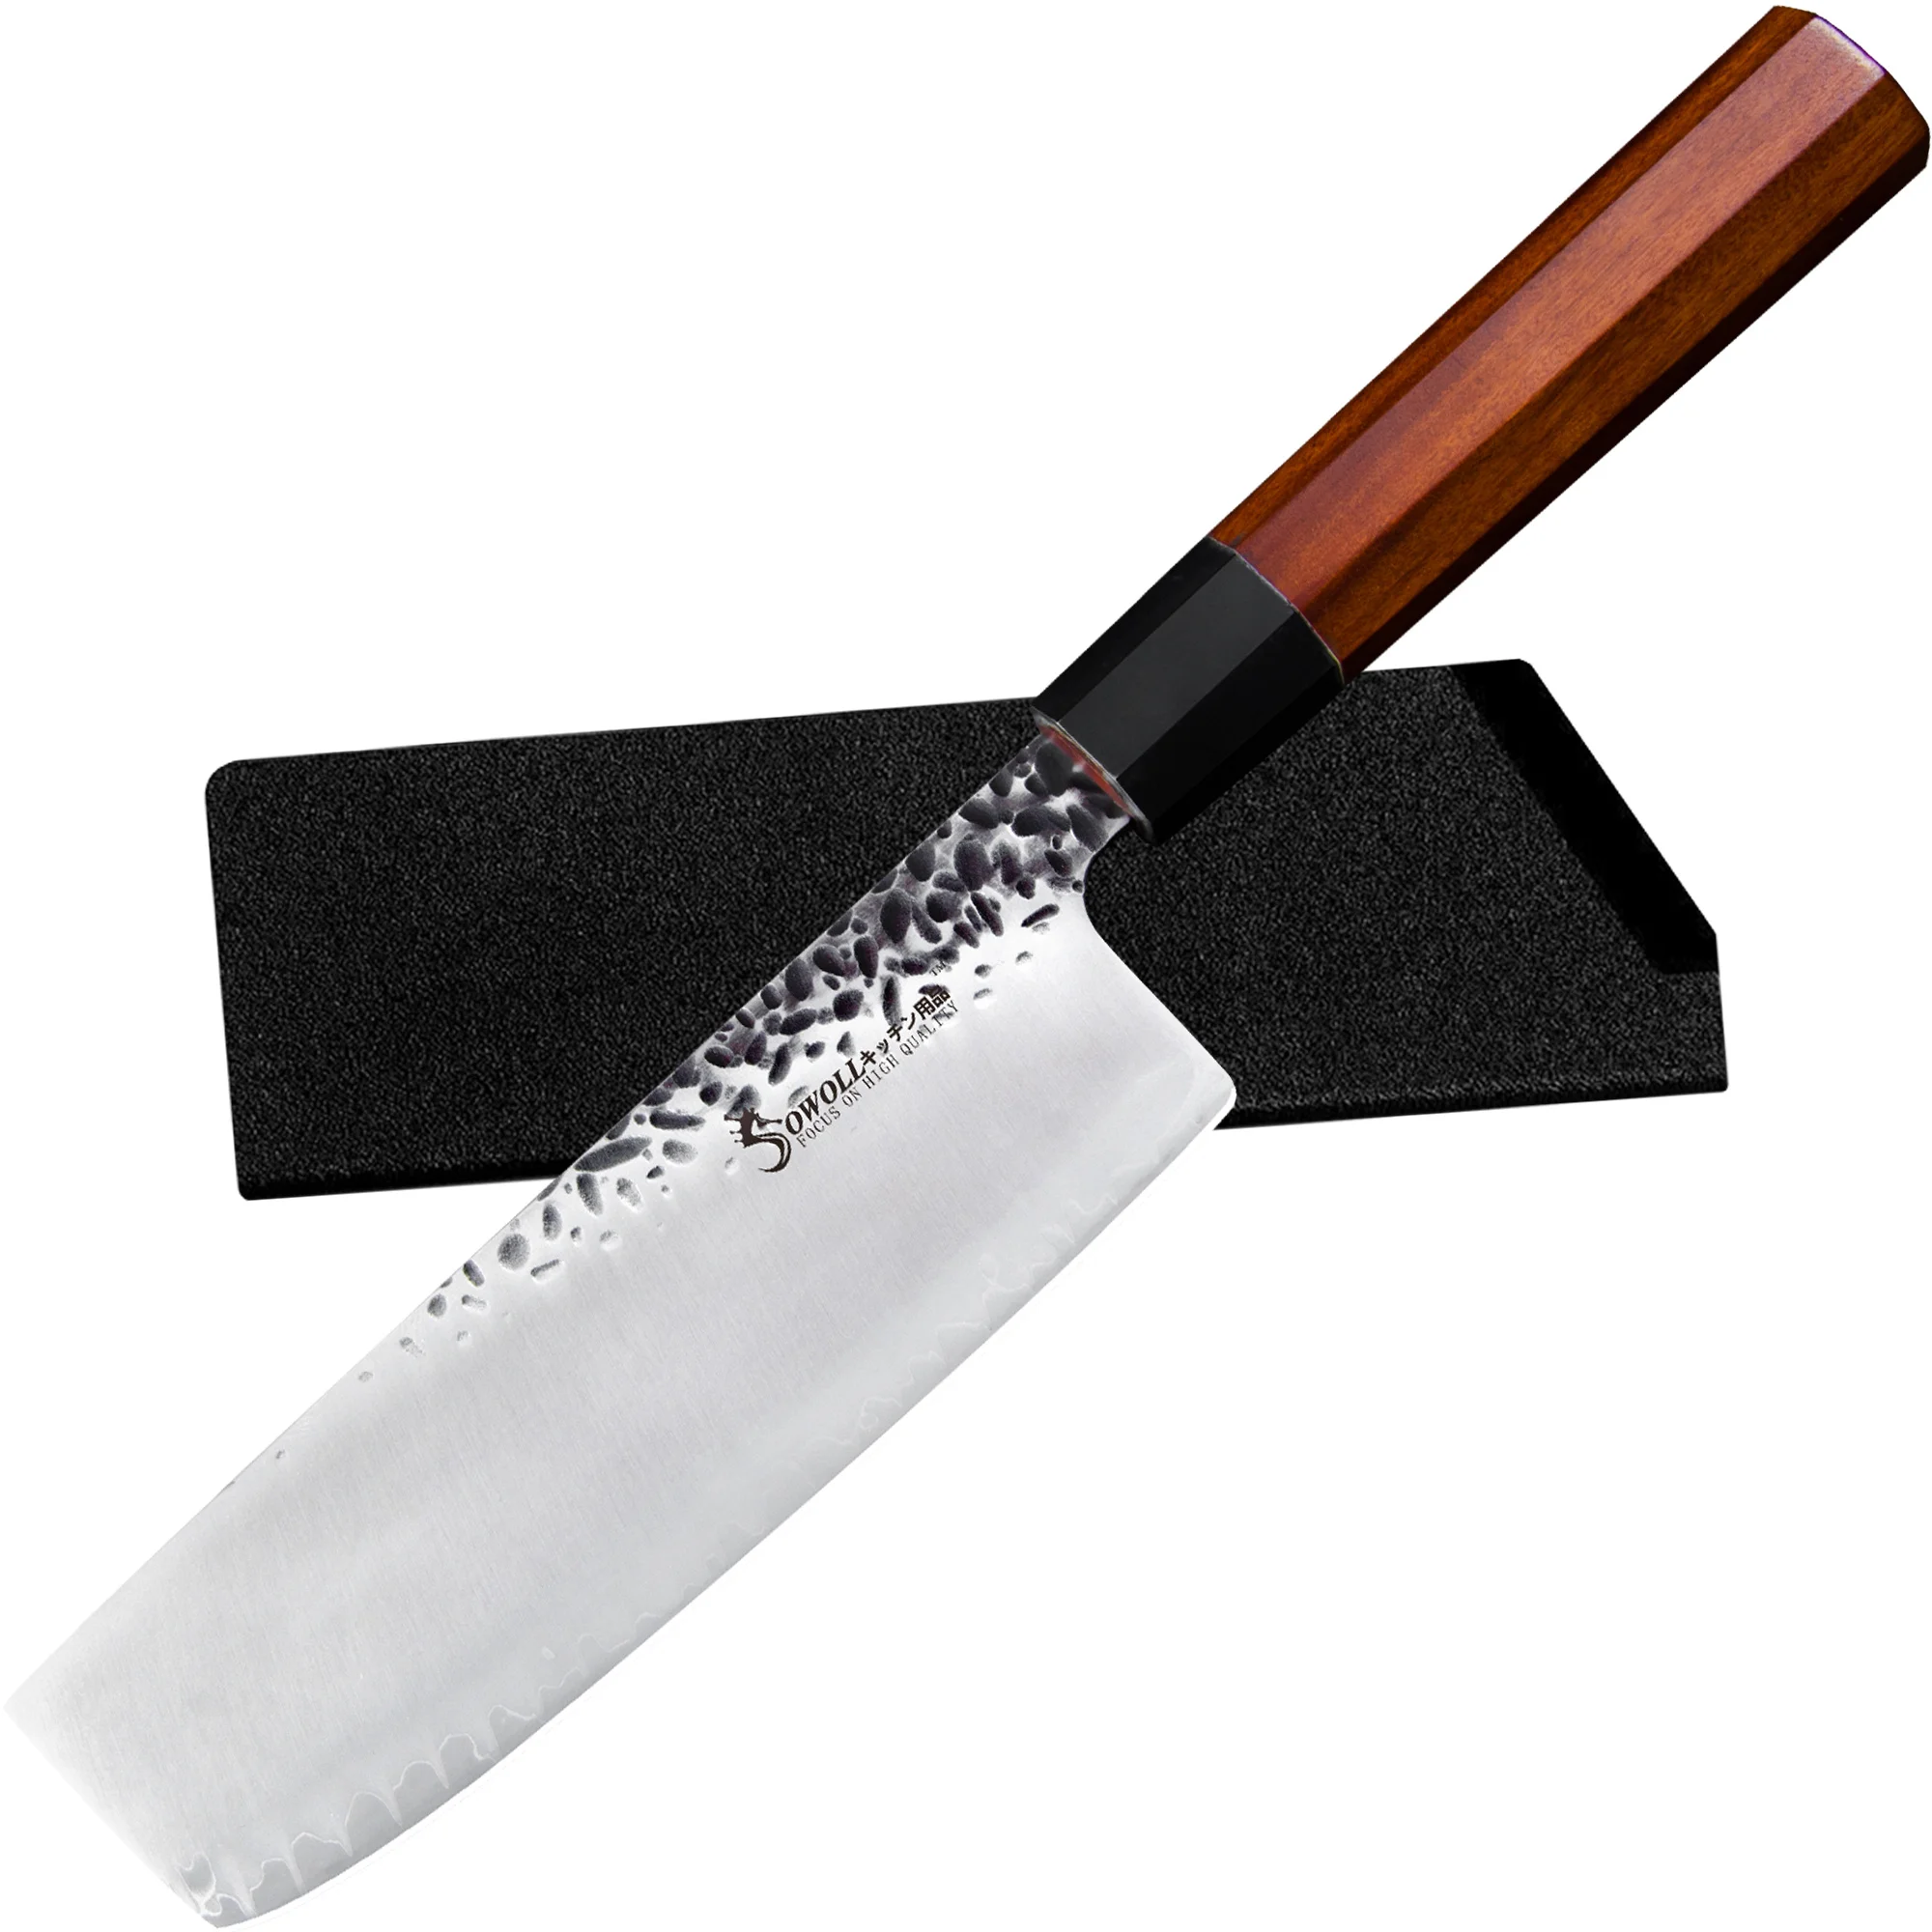 

Xyj 7 Inch Damascus Steel Chopping Knife Wooden Handle Sharp Blade Kitchen Pro Chef Slicing Knives Meat Cleaver Cutlery Tools